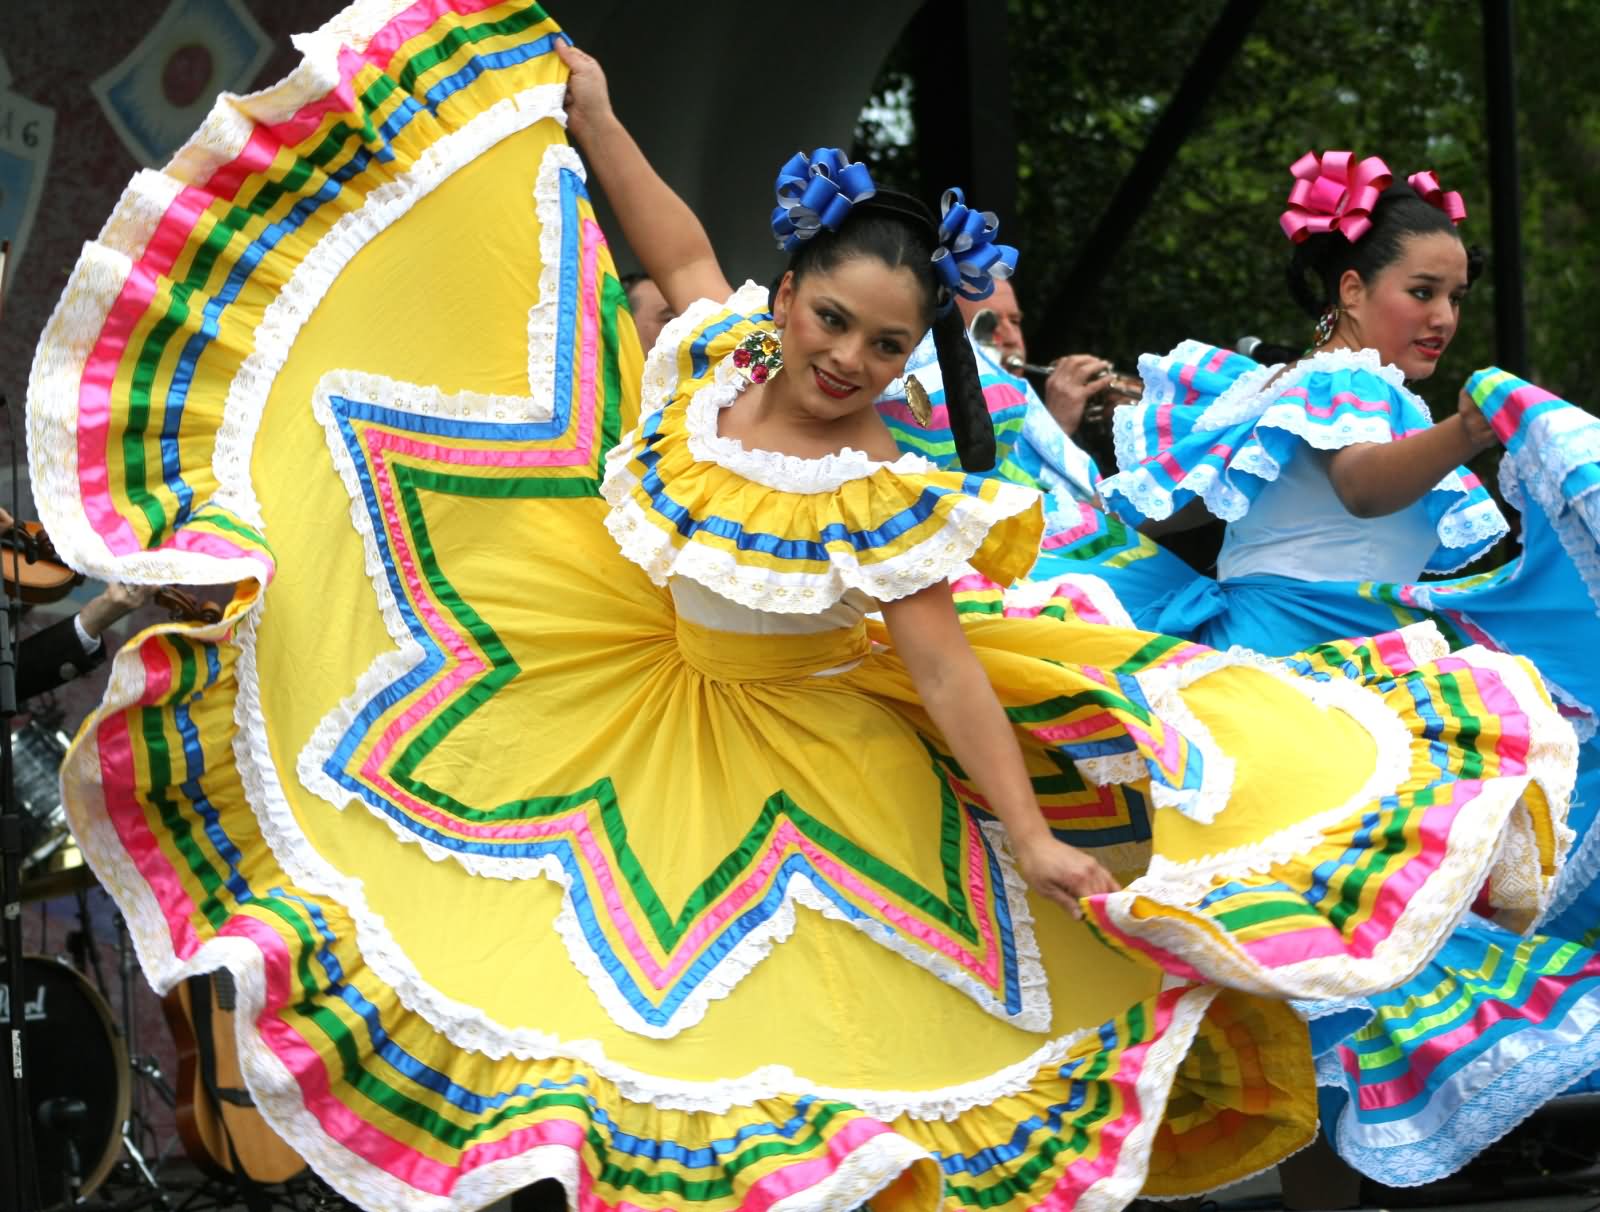 Mexican Girls Dancing And Celebrating Cinco De Mayo